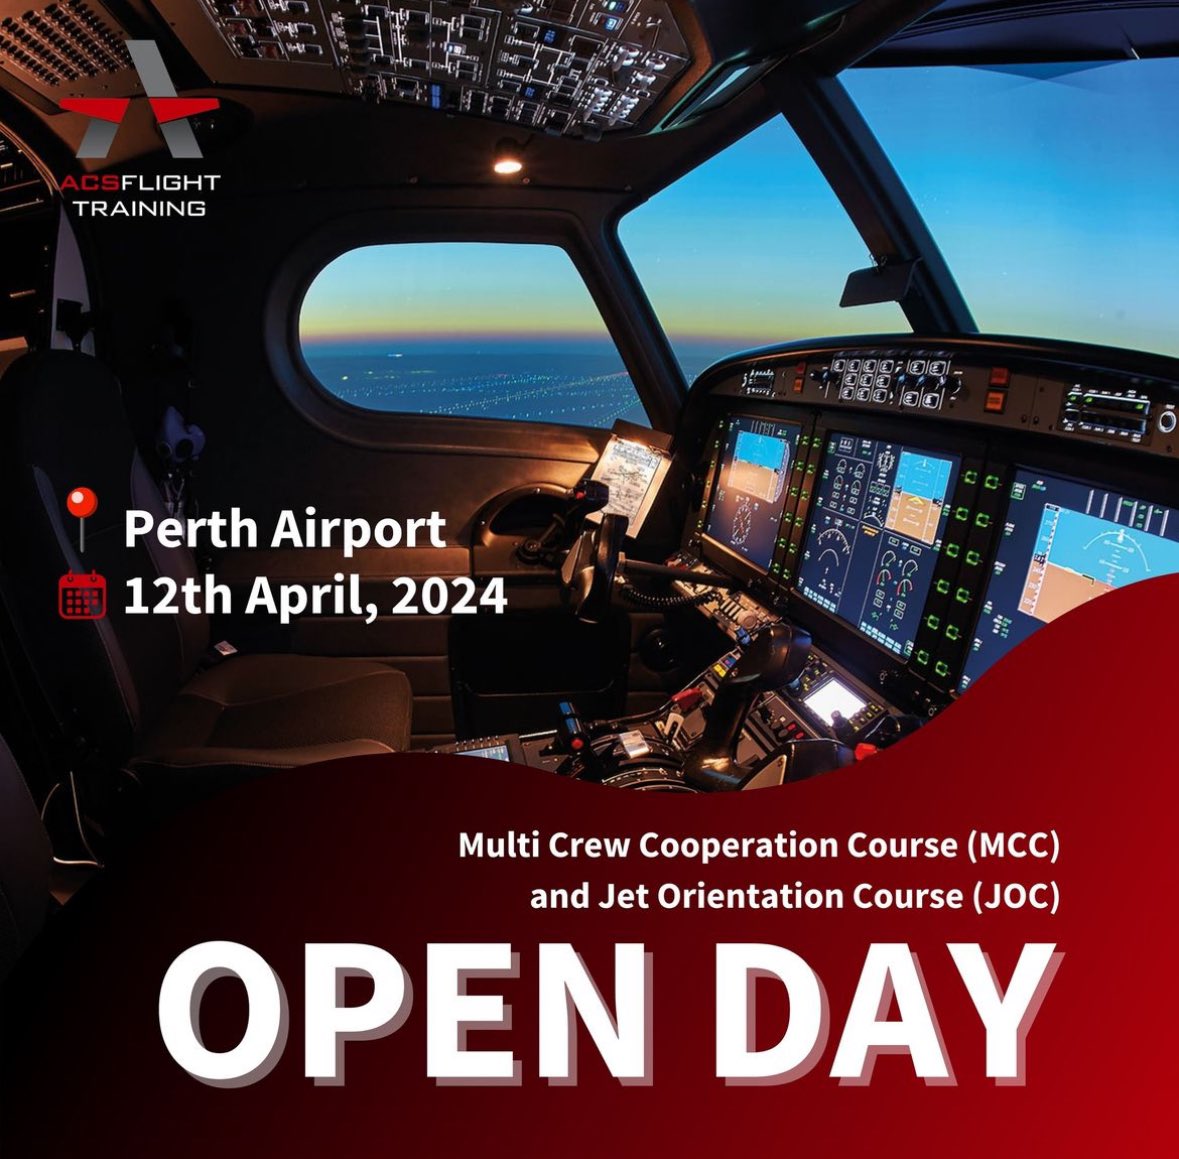 Multi Crew Cooperation Course (MCC) and Jet Orientation Course (JOC) Open Day at Perth Airport on Friday 12th April